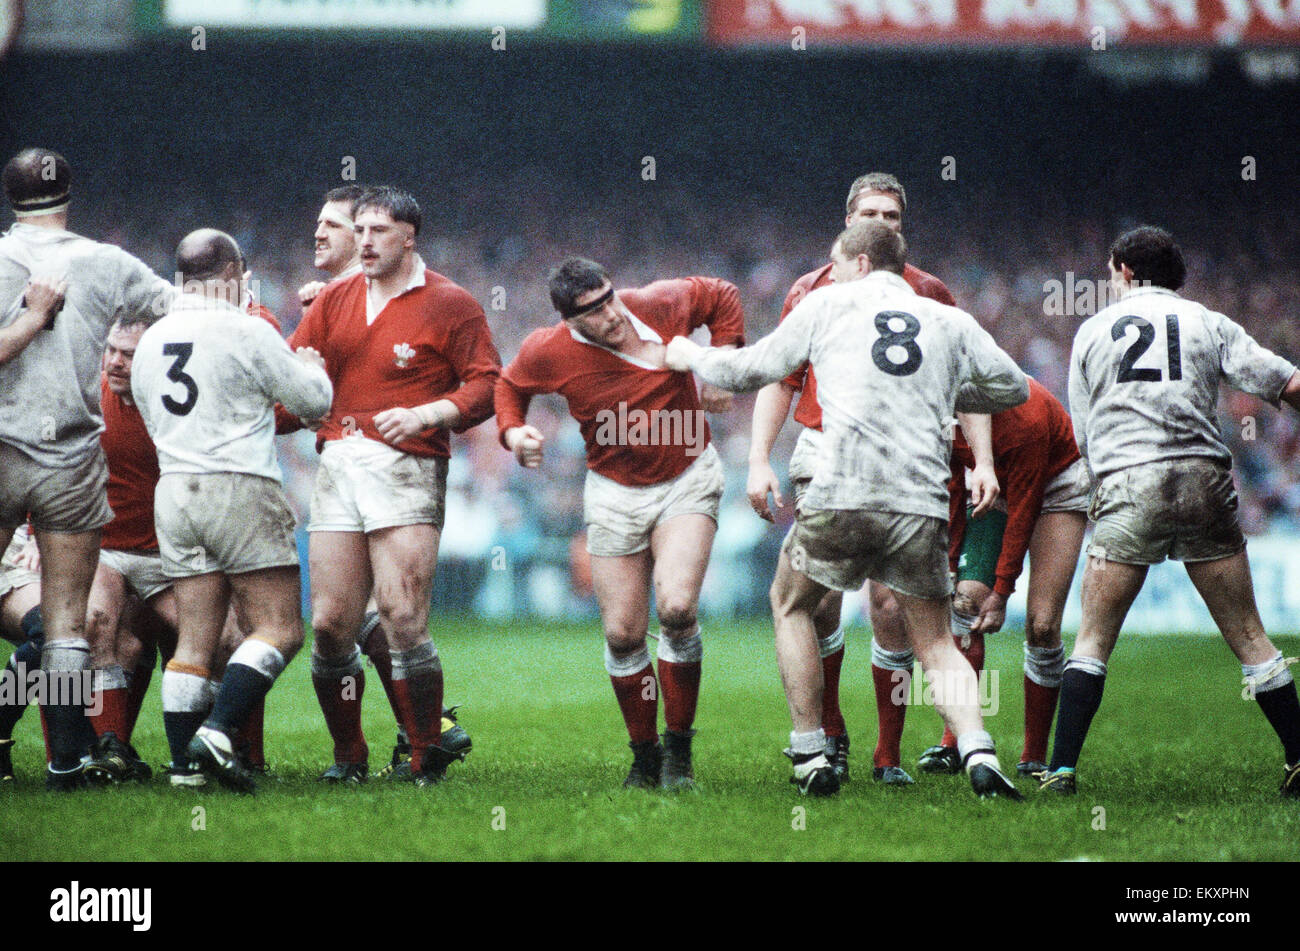 England and Bath prop Gareth Chilcott number 3 and Dean Richard number 8 have a altercation with some of the welsh team during the Wales v England five nations championship match at Cardiff Arms Park. 19th March 1989 Stock Photo